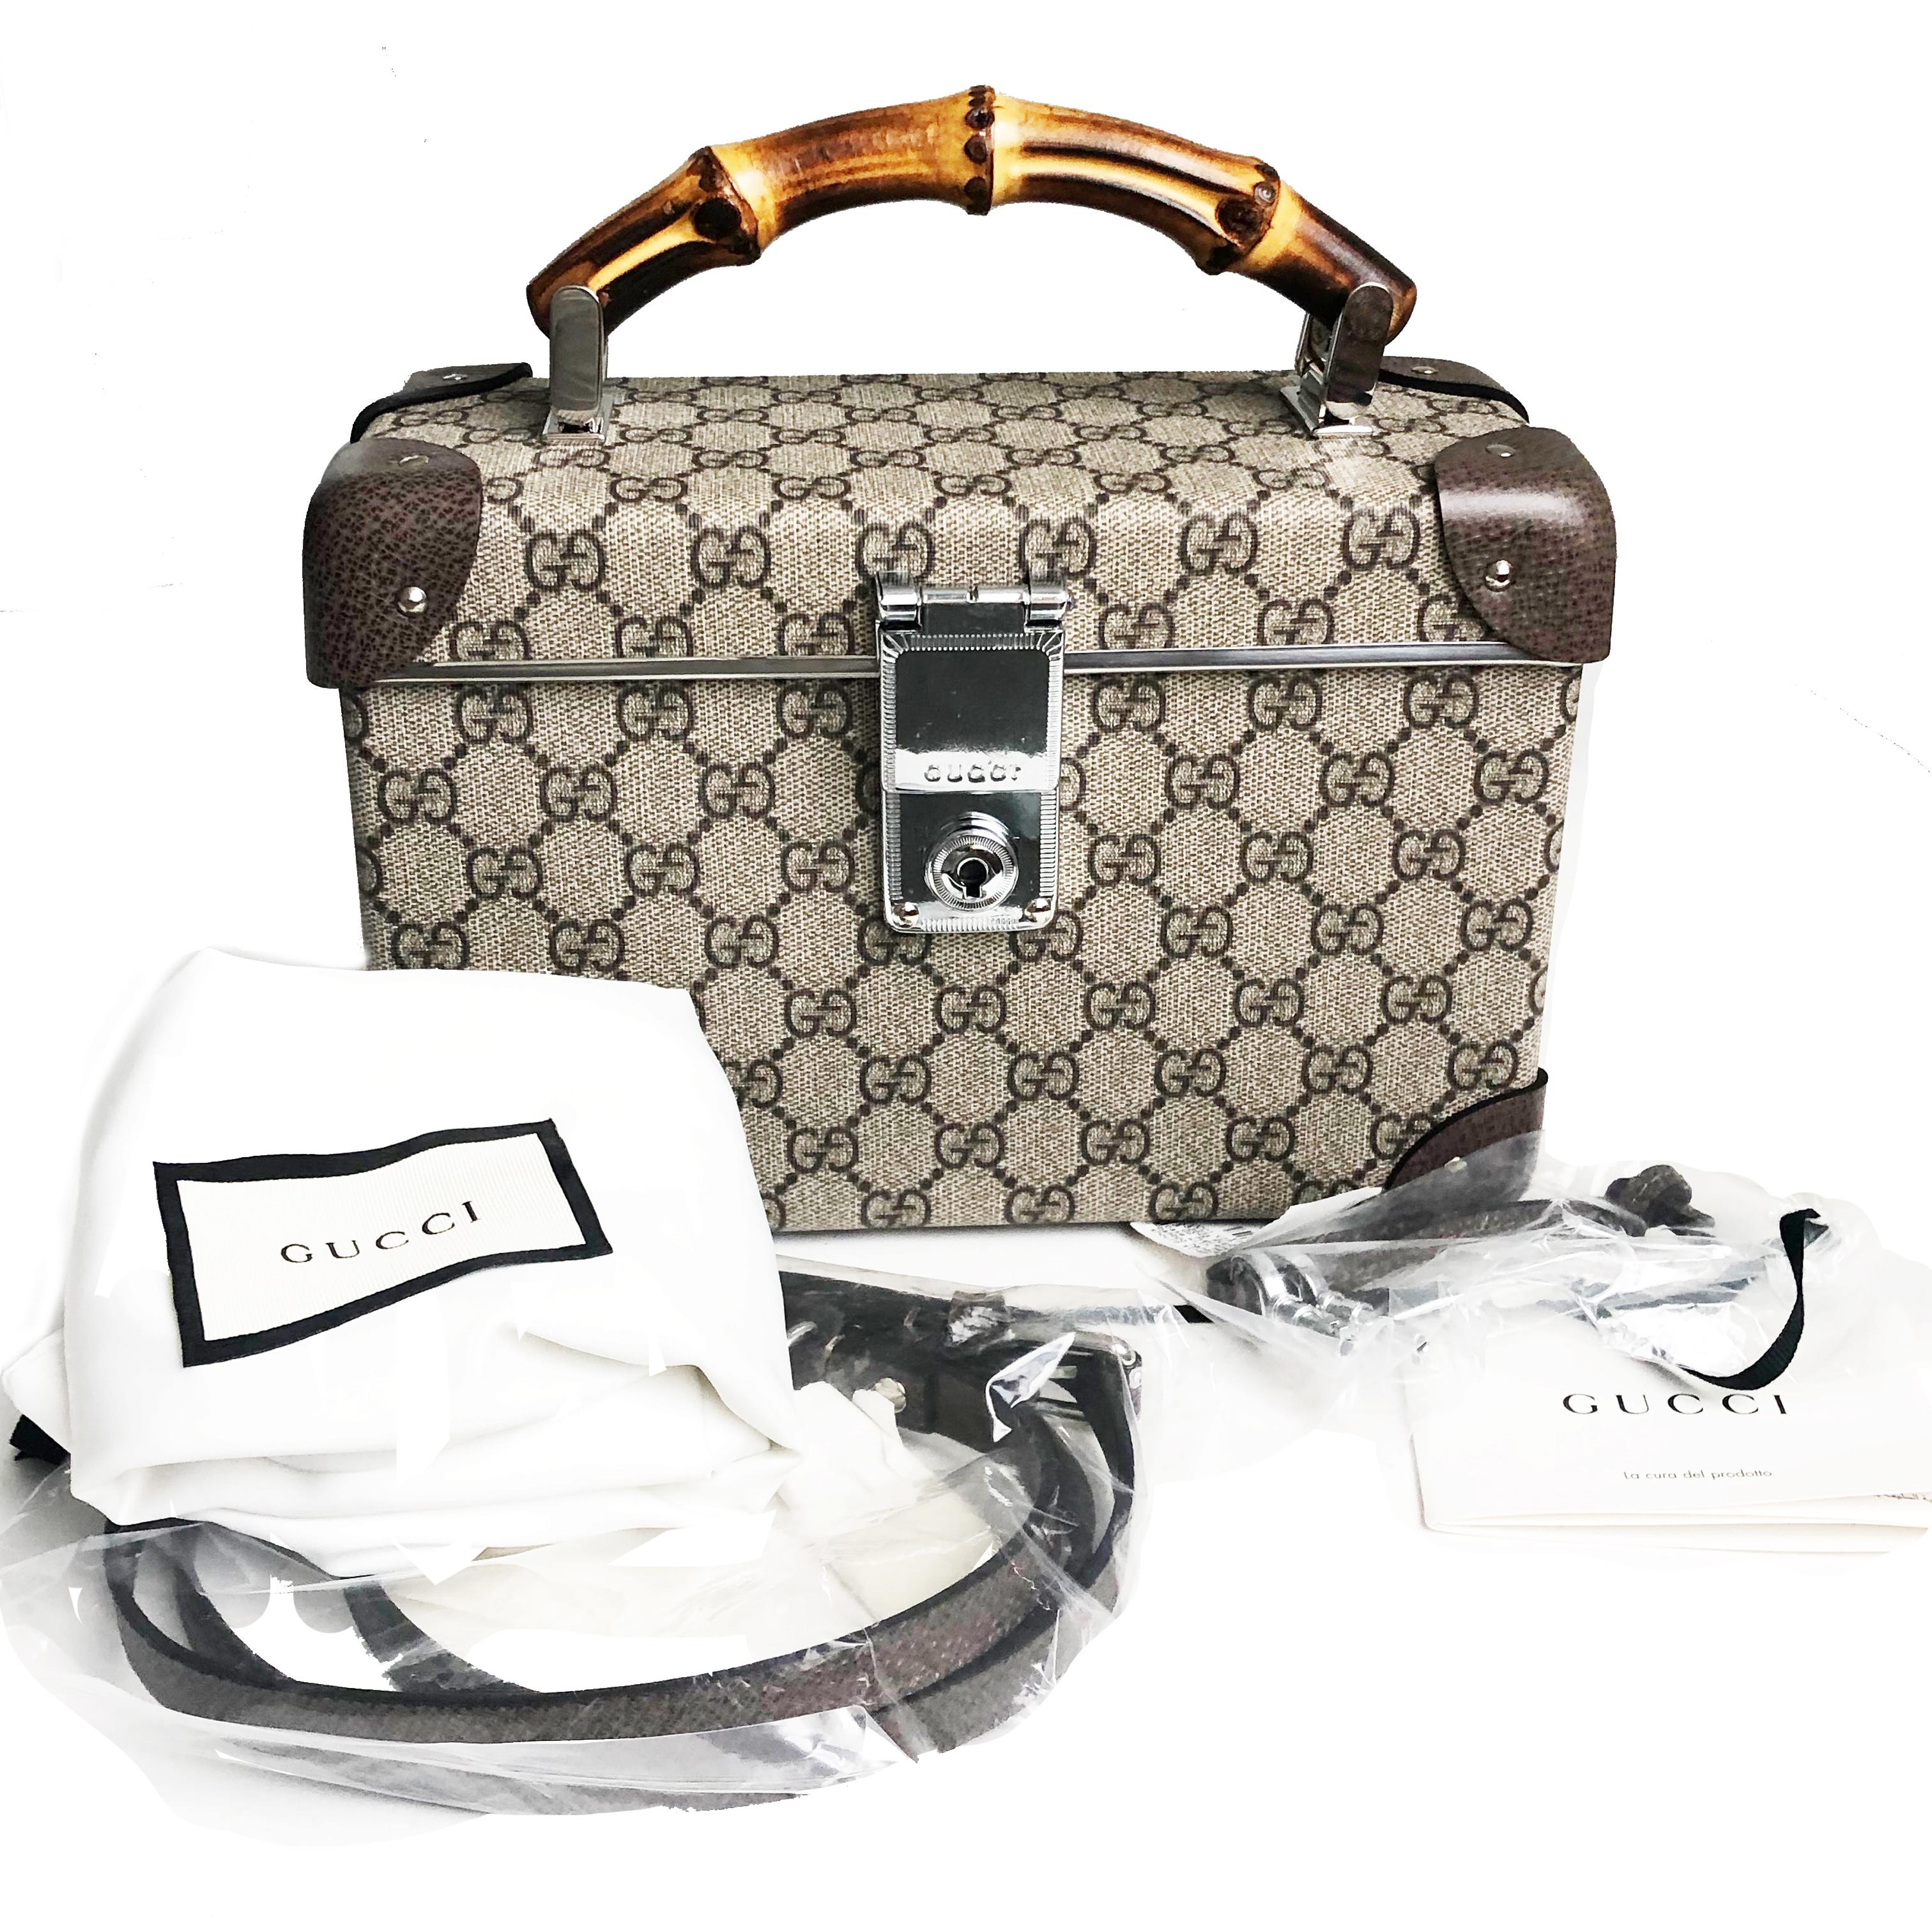 New with tag Gucci Globetrotter GG Beauty Case with bamboo handle, from the fall/winter 2018 runway collection.  This was a special collaboration between Gucci & luxe travel brand Globetrotter & made in England. Beige/Ebony Gucci Supreme canvas,